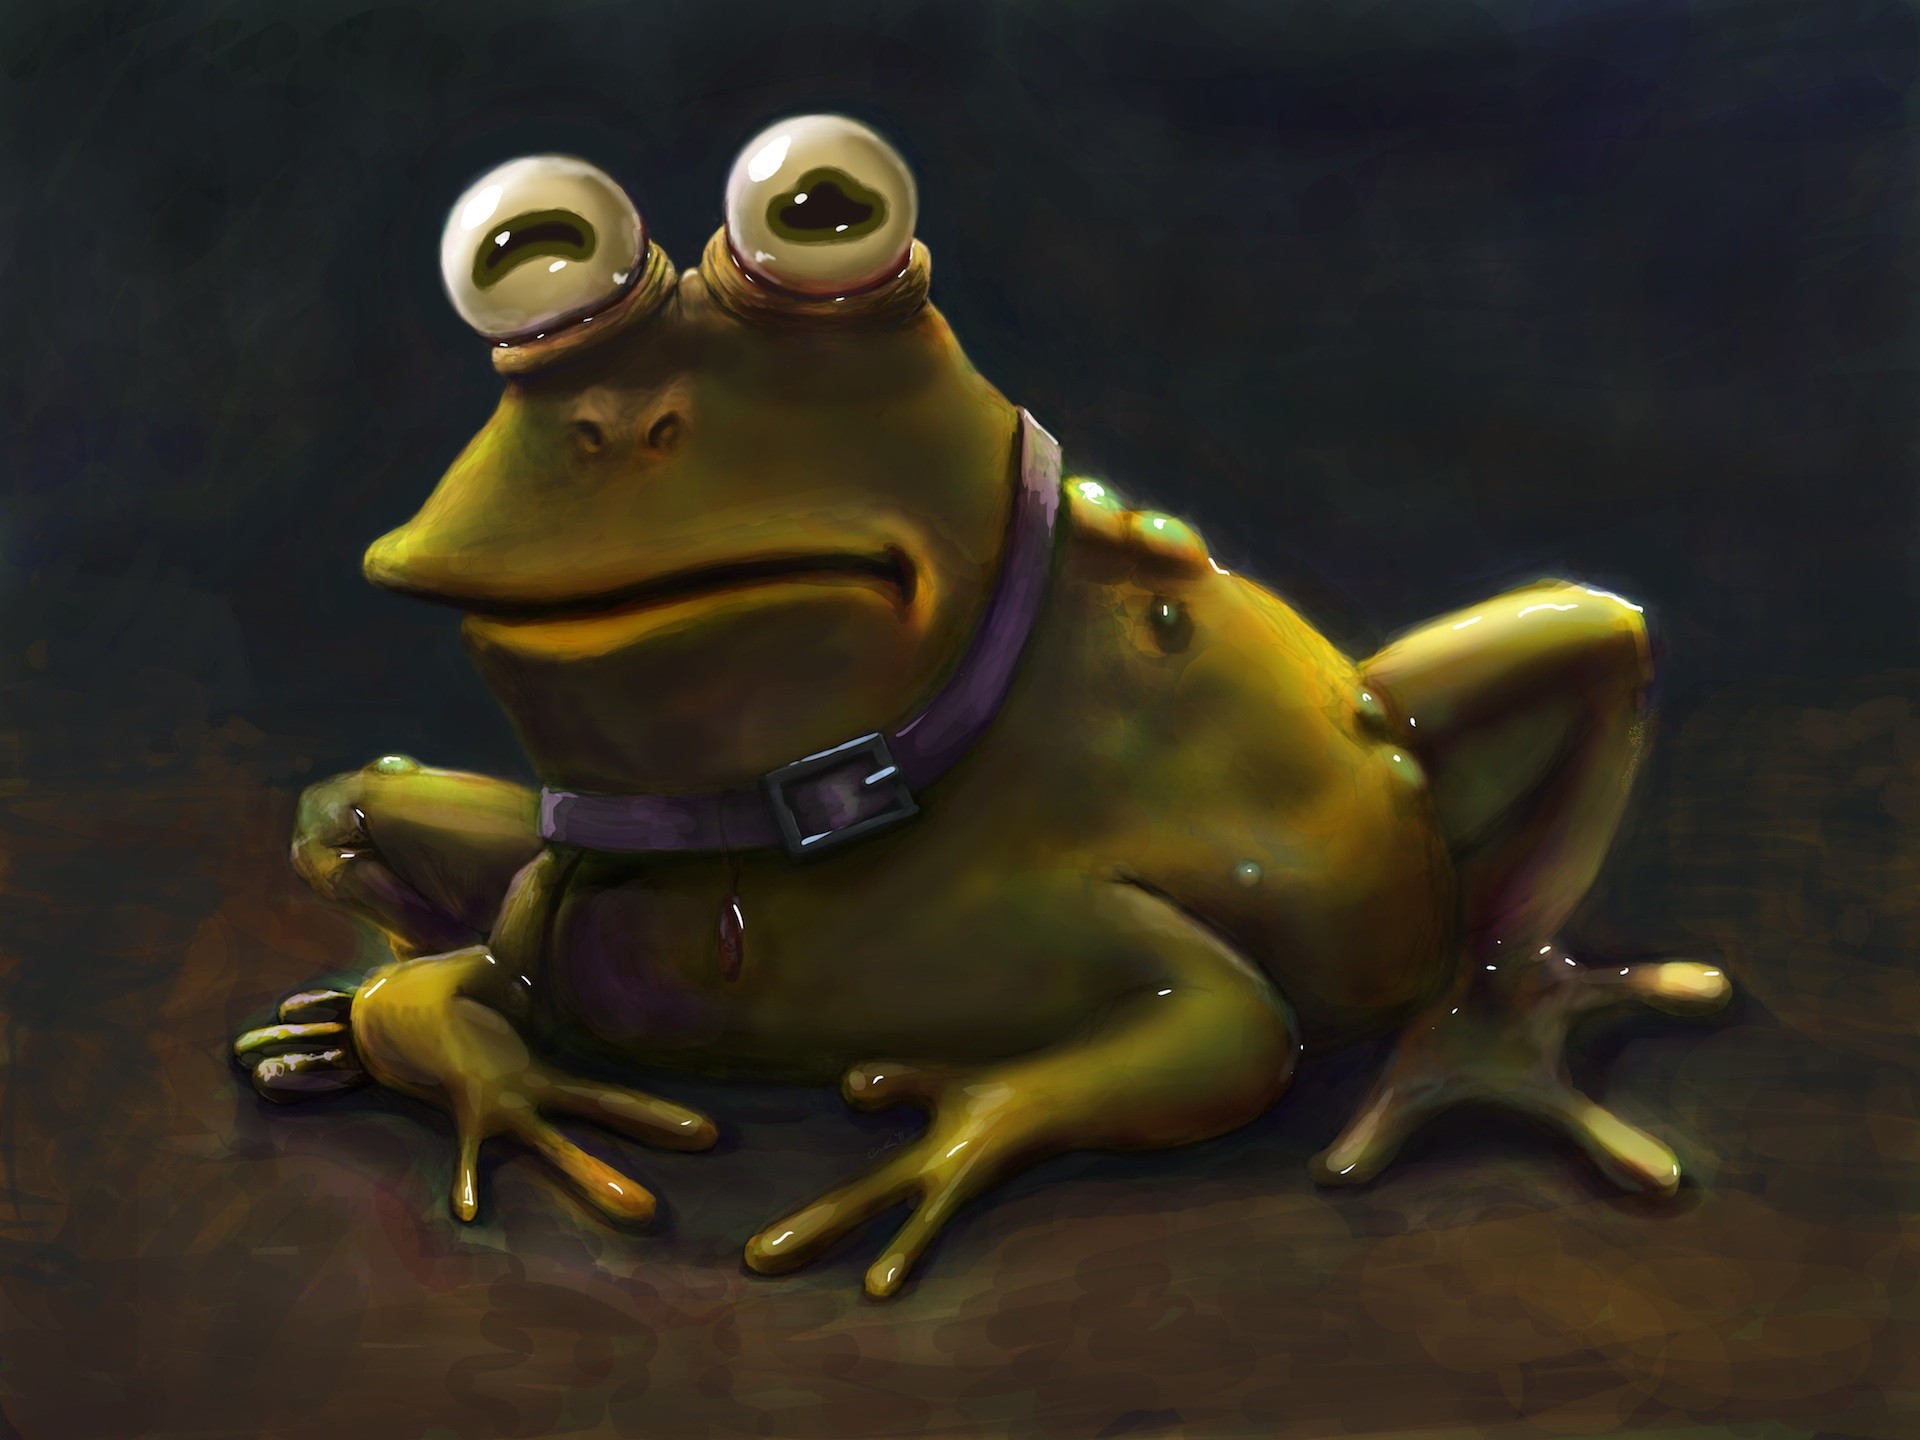 1920x1440 Hypnotoad PS Painting by dkcg Hypnotoad PS Painting by dkcg